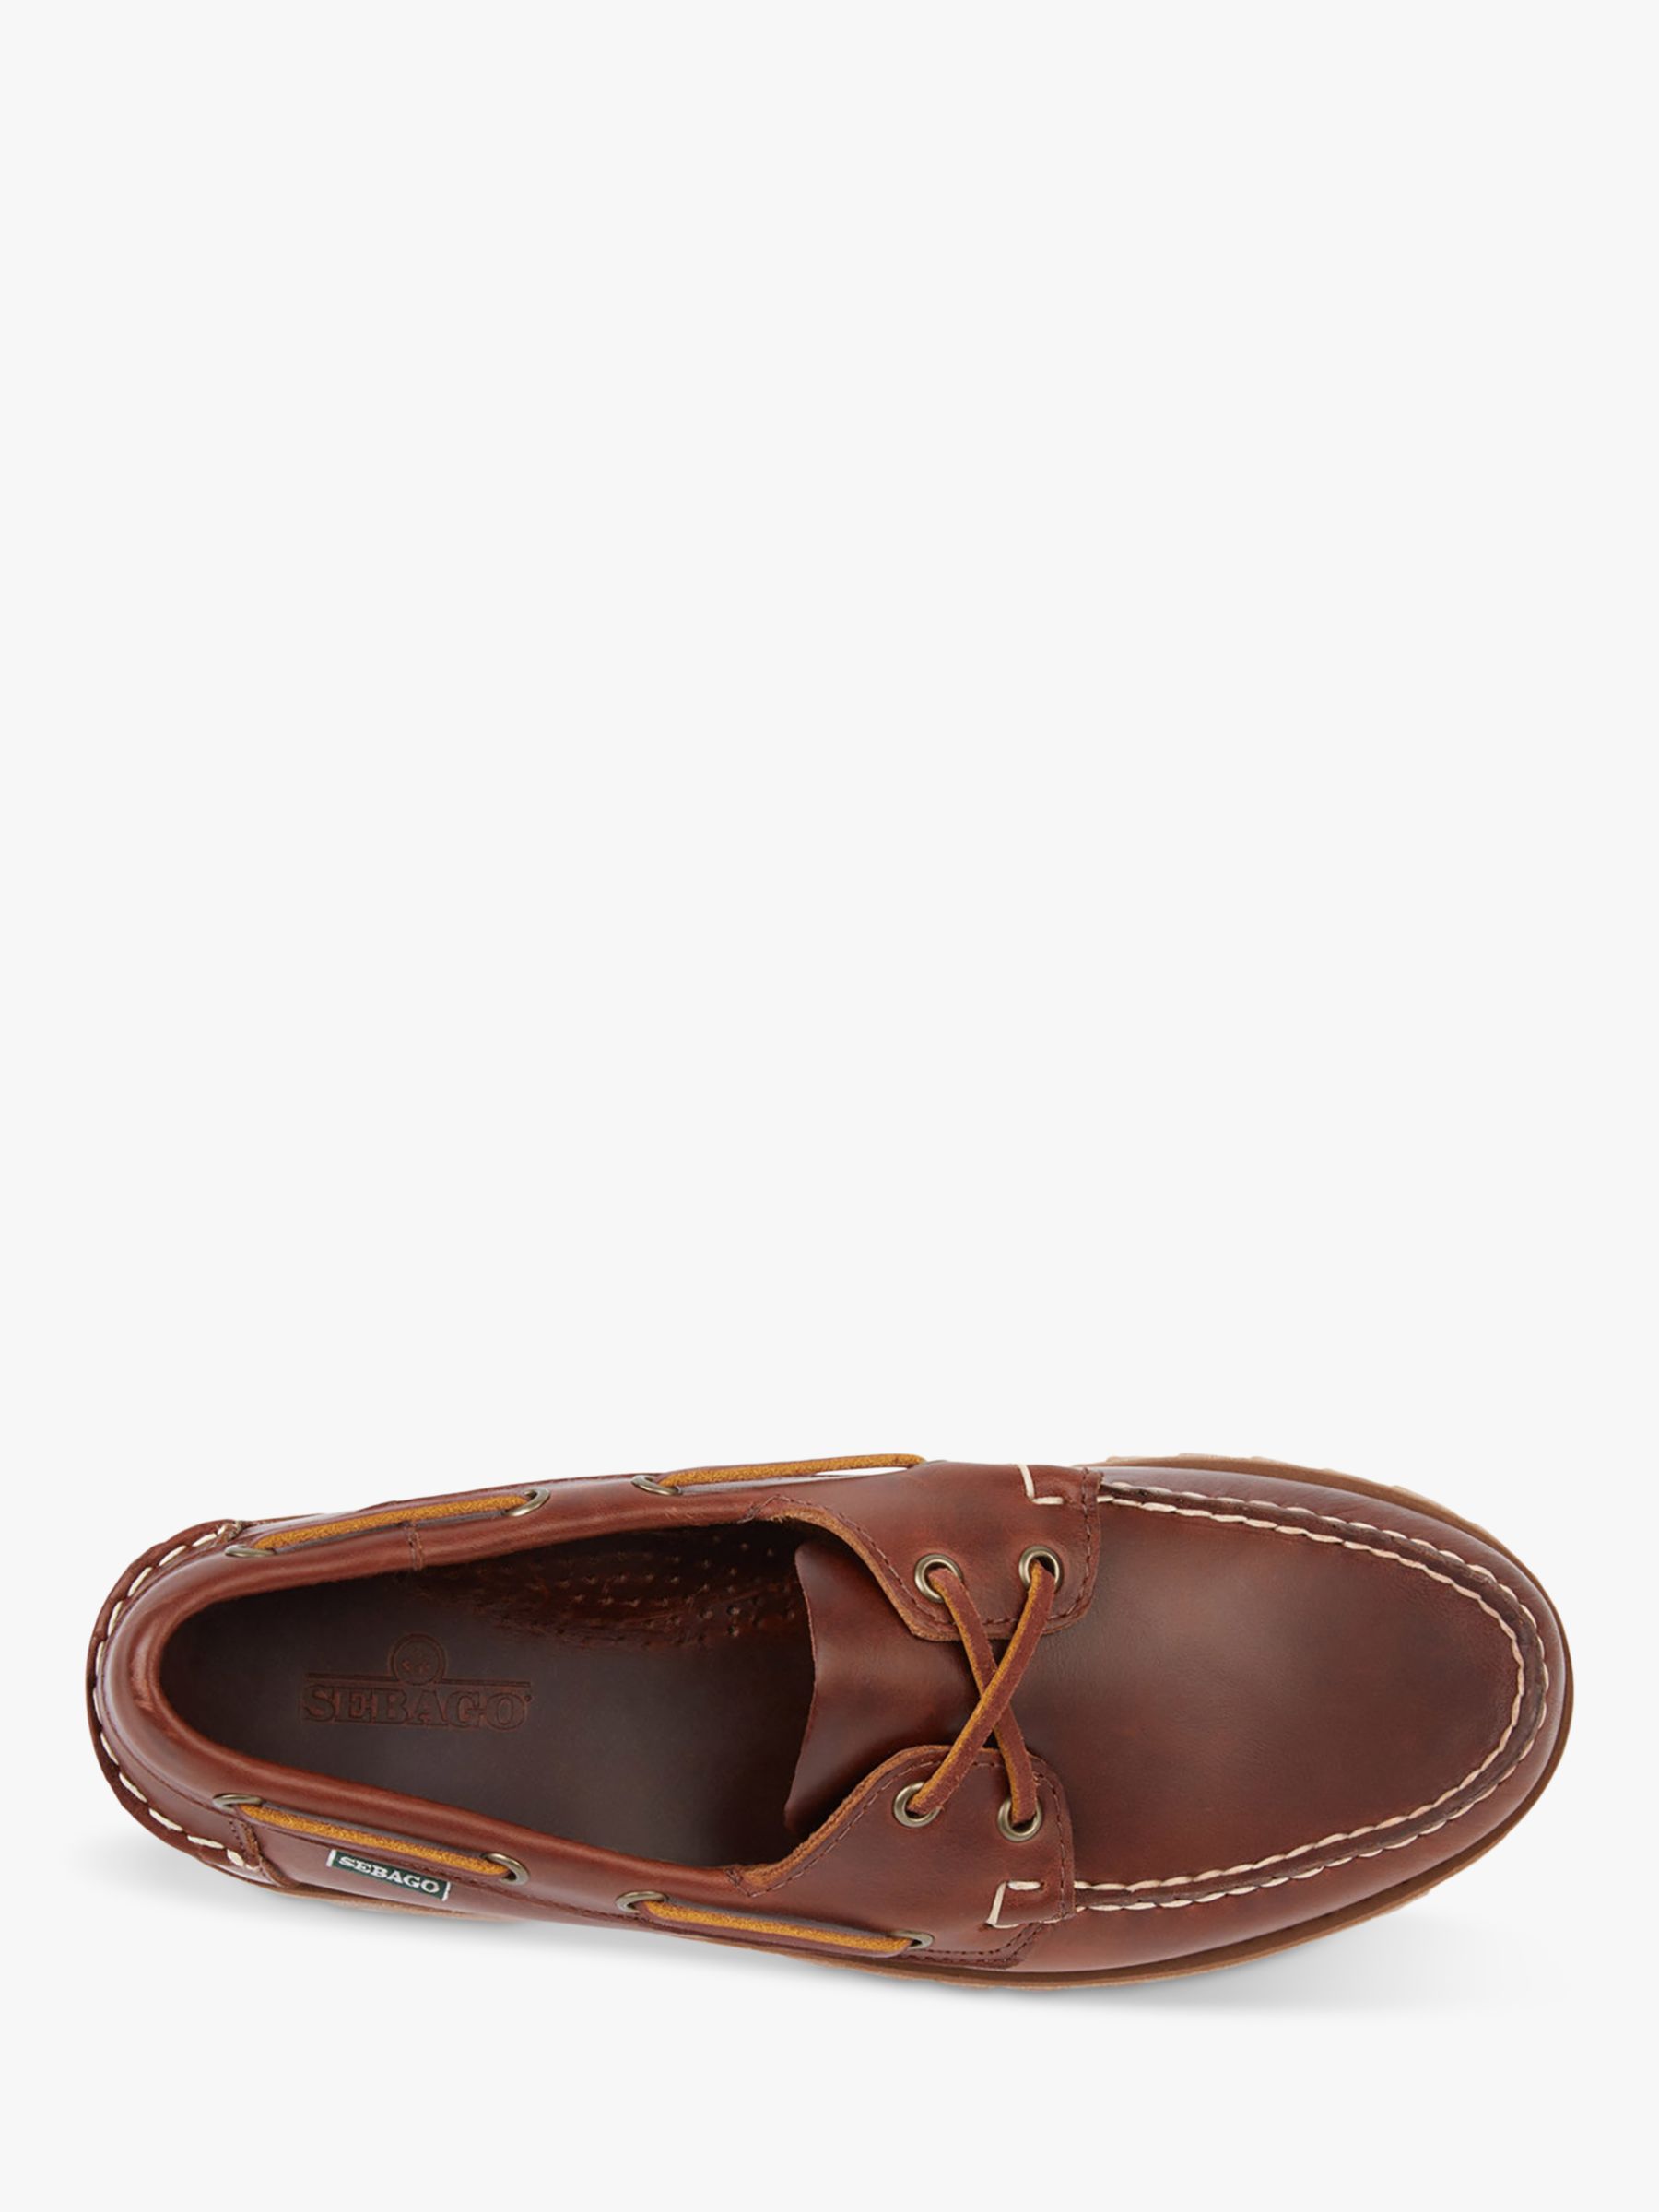 Sebago Ranger Waxy Leather Boat Shoes, Brown, 7